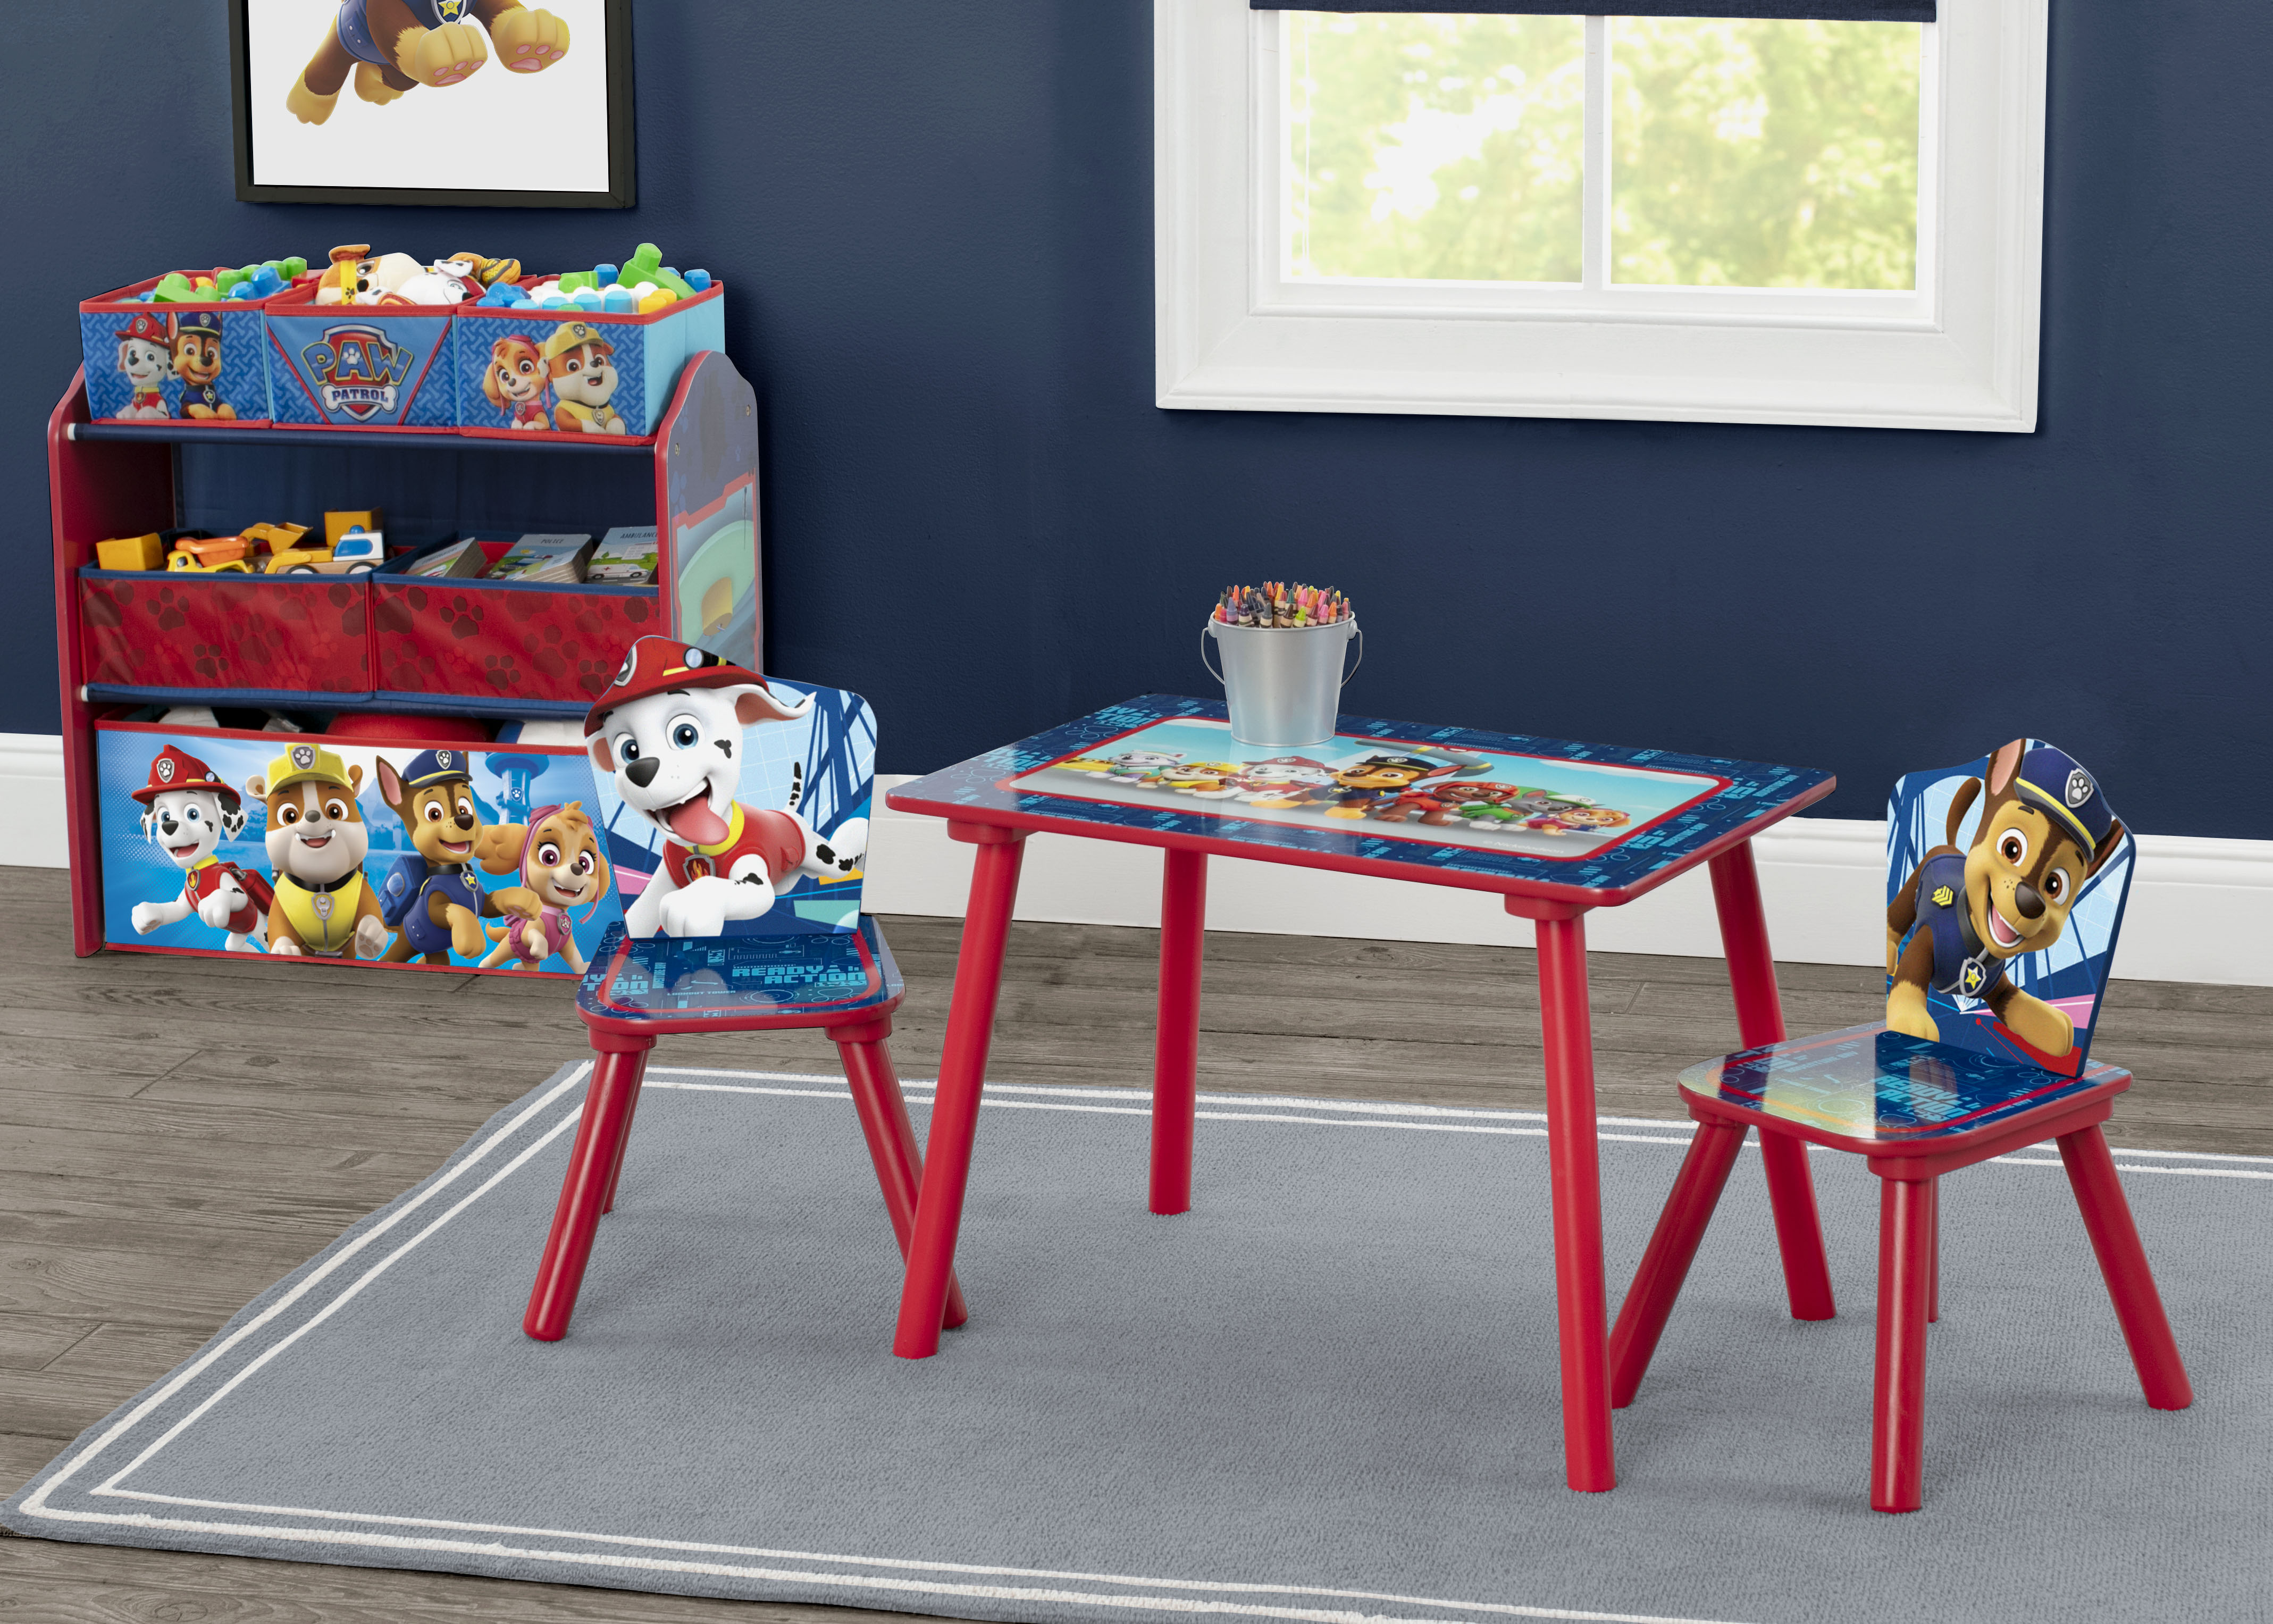 Details about   Kids Table Sturdy Chairs Set Storage Activity Desk Playroom Furniture Paw Patrol 